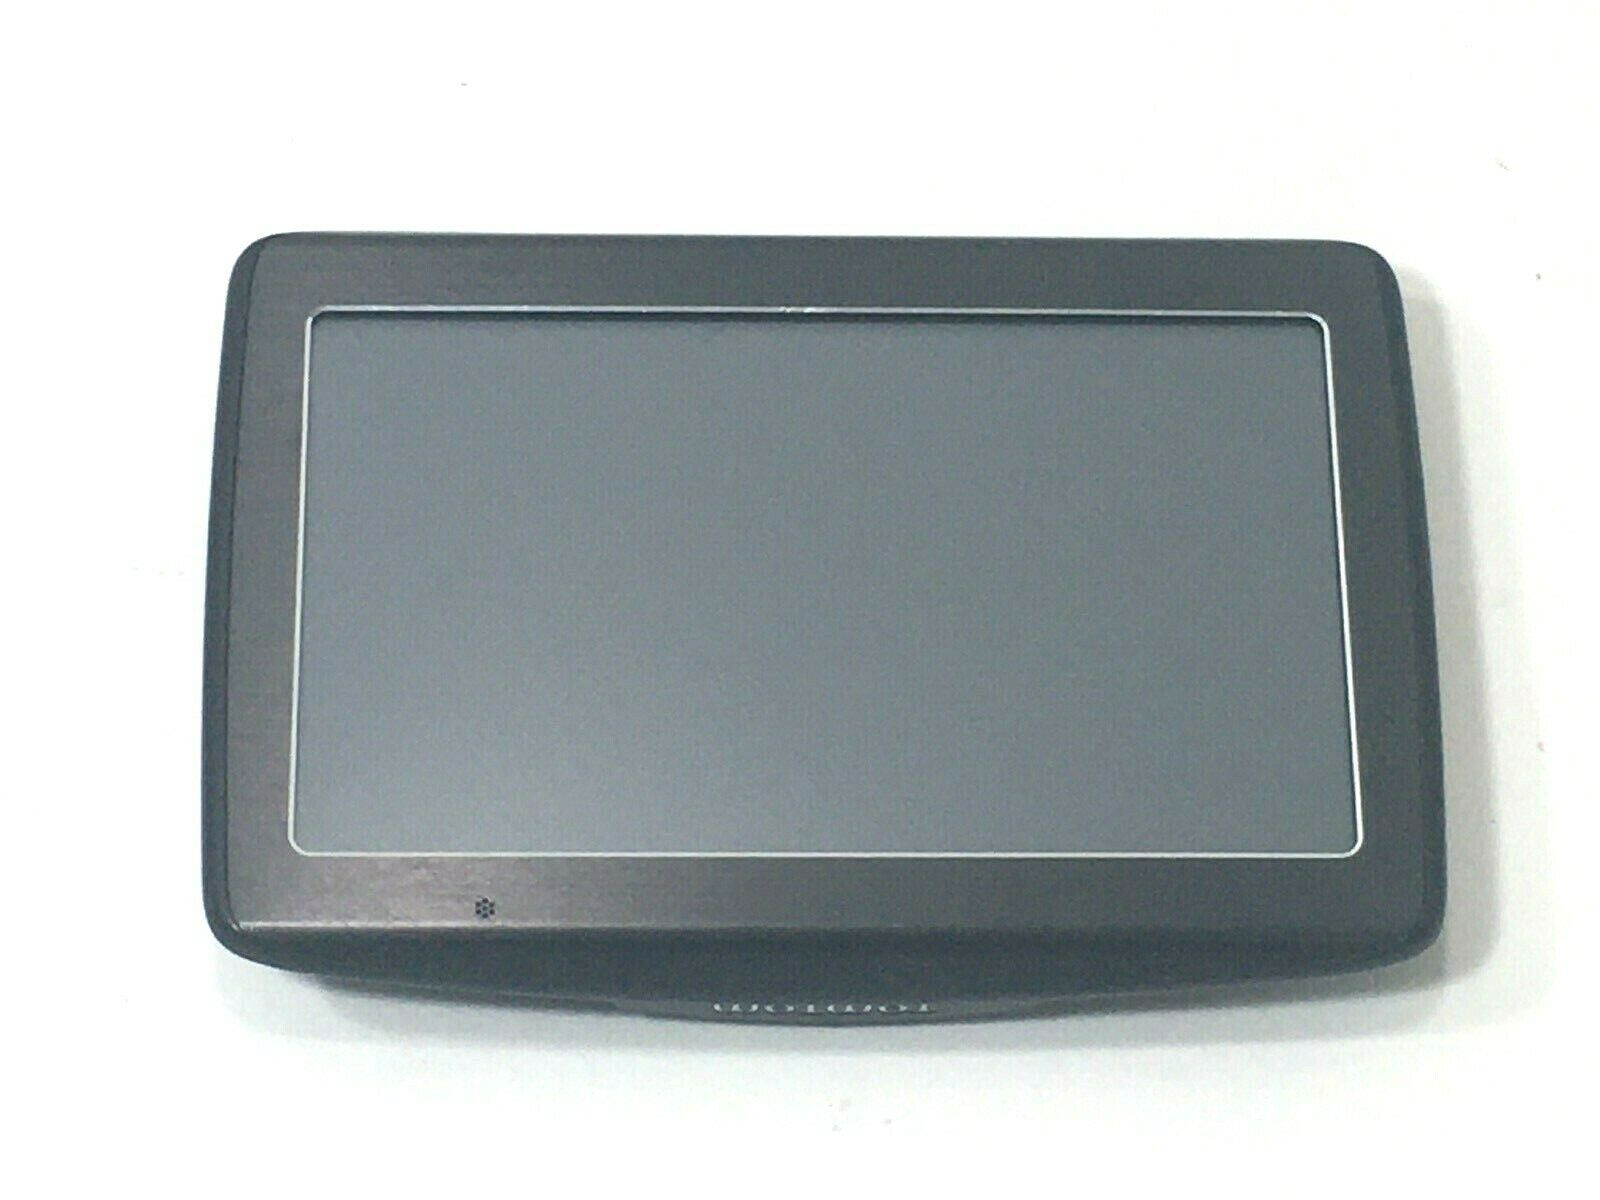 Tomtom Sat Nav Gps 4eq41 Z1230 Without Mount And Charger Unit Only